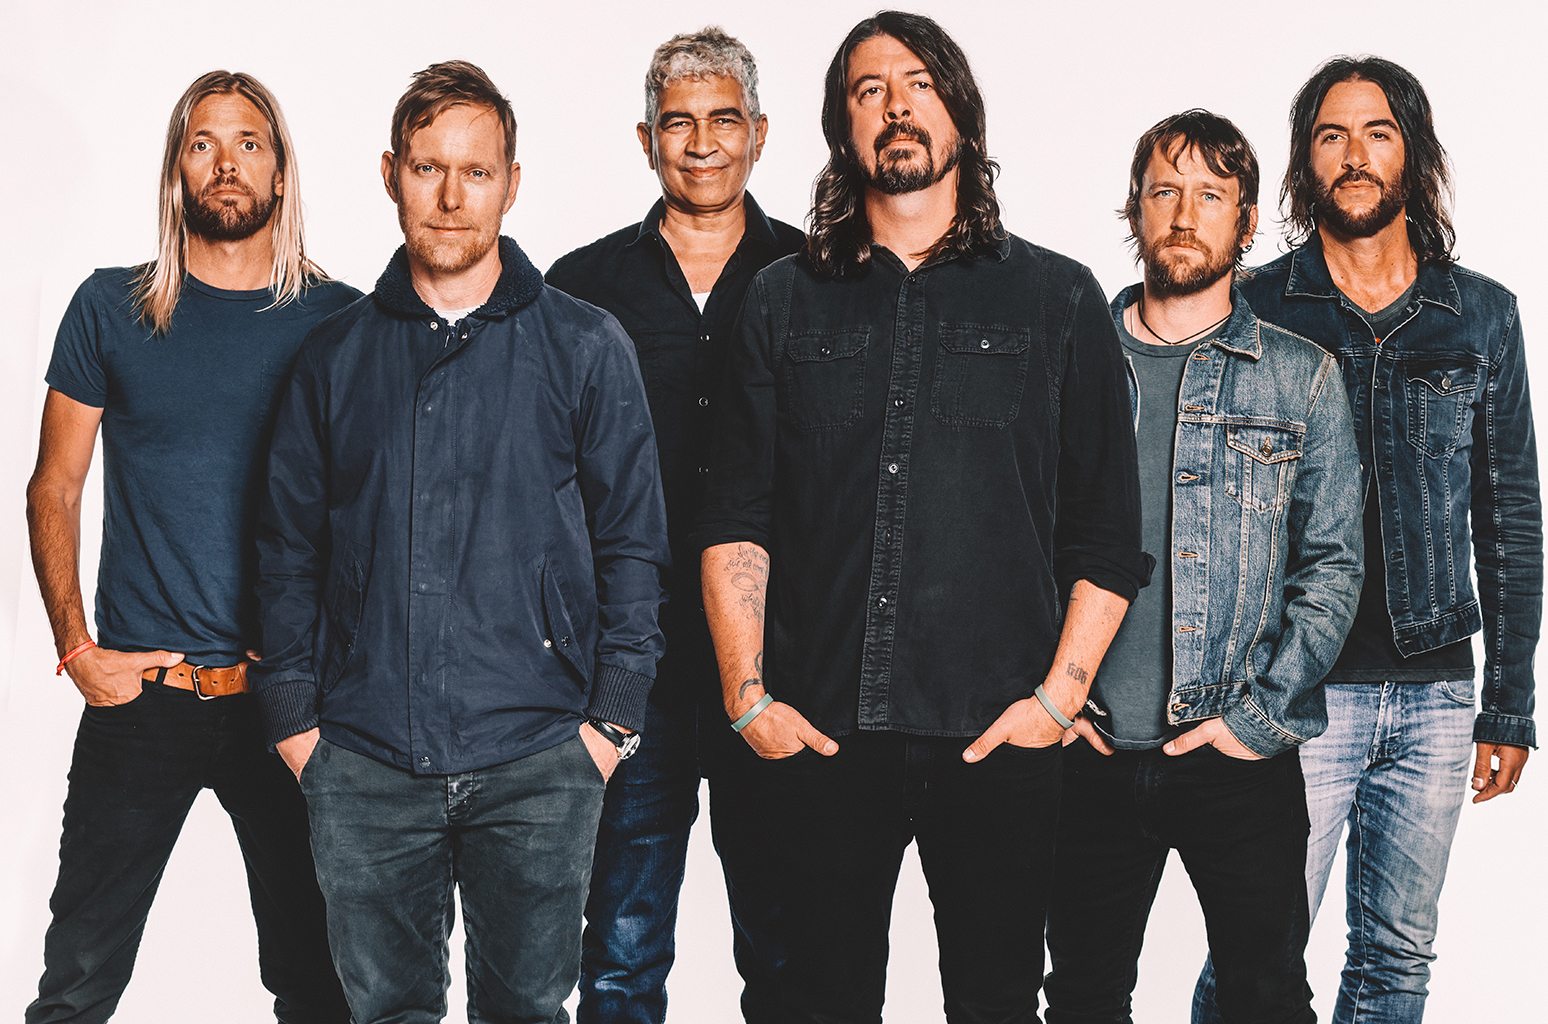 Foo Fighters – Concrete & Gold